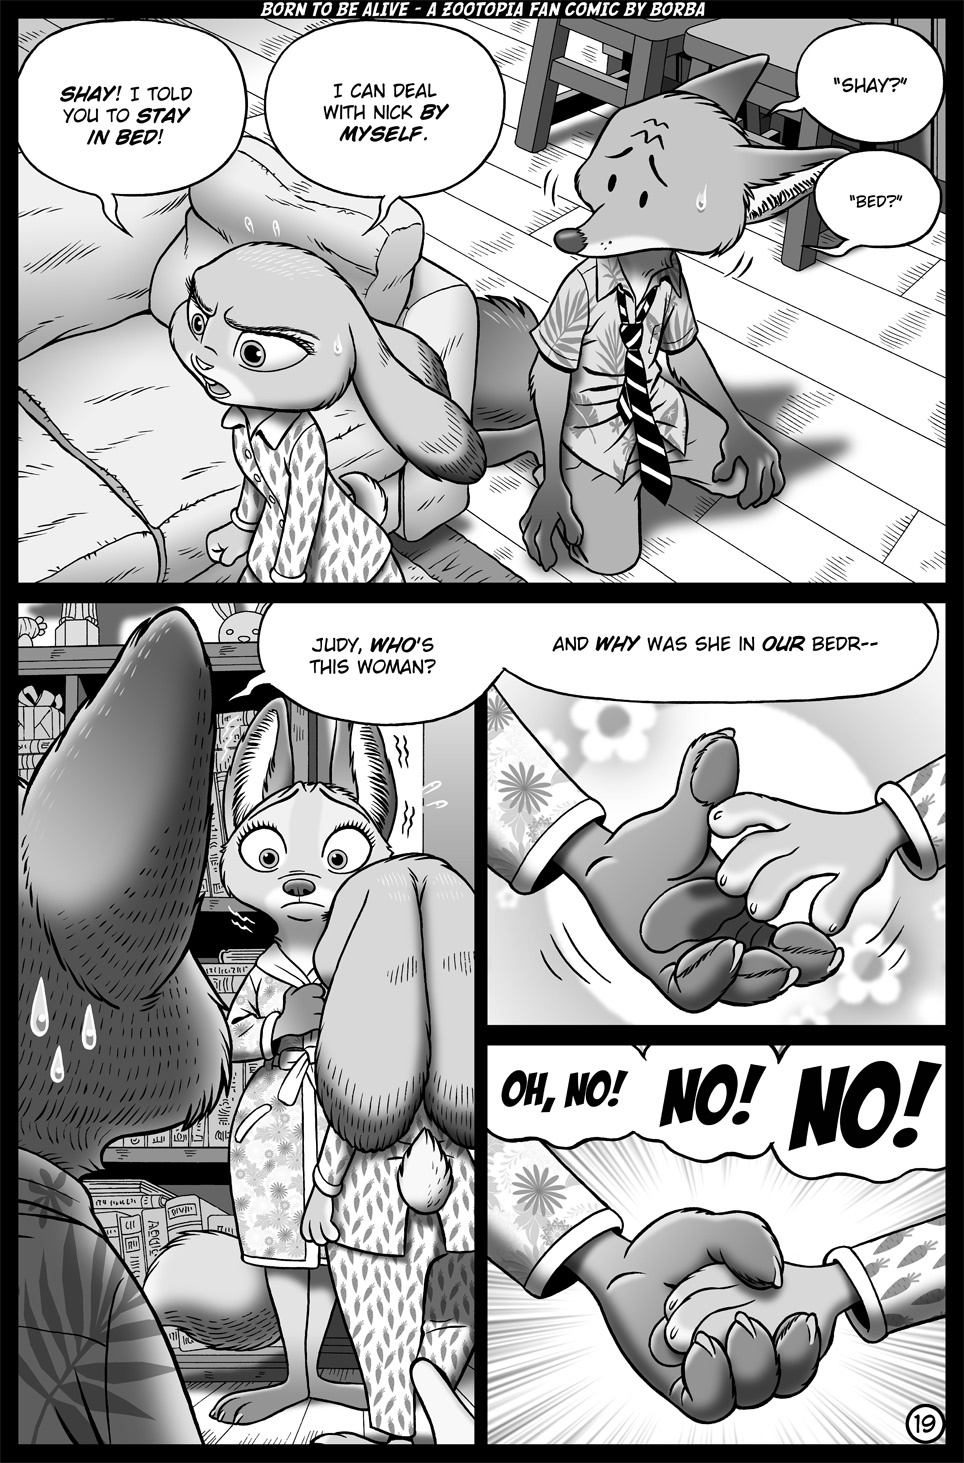 Apparently The Artist Of That Zootopia Abortion One Made A